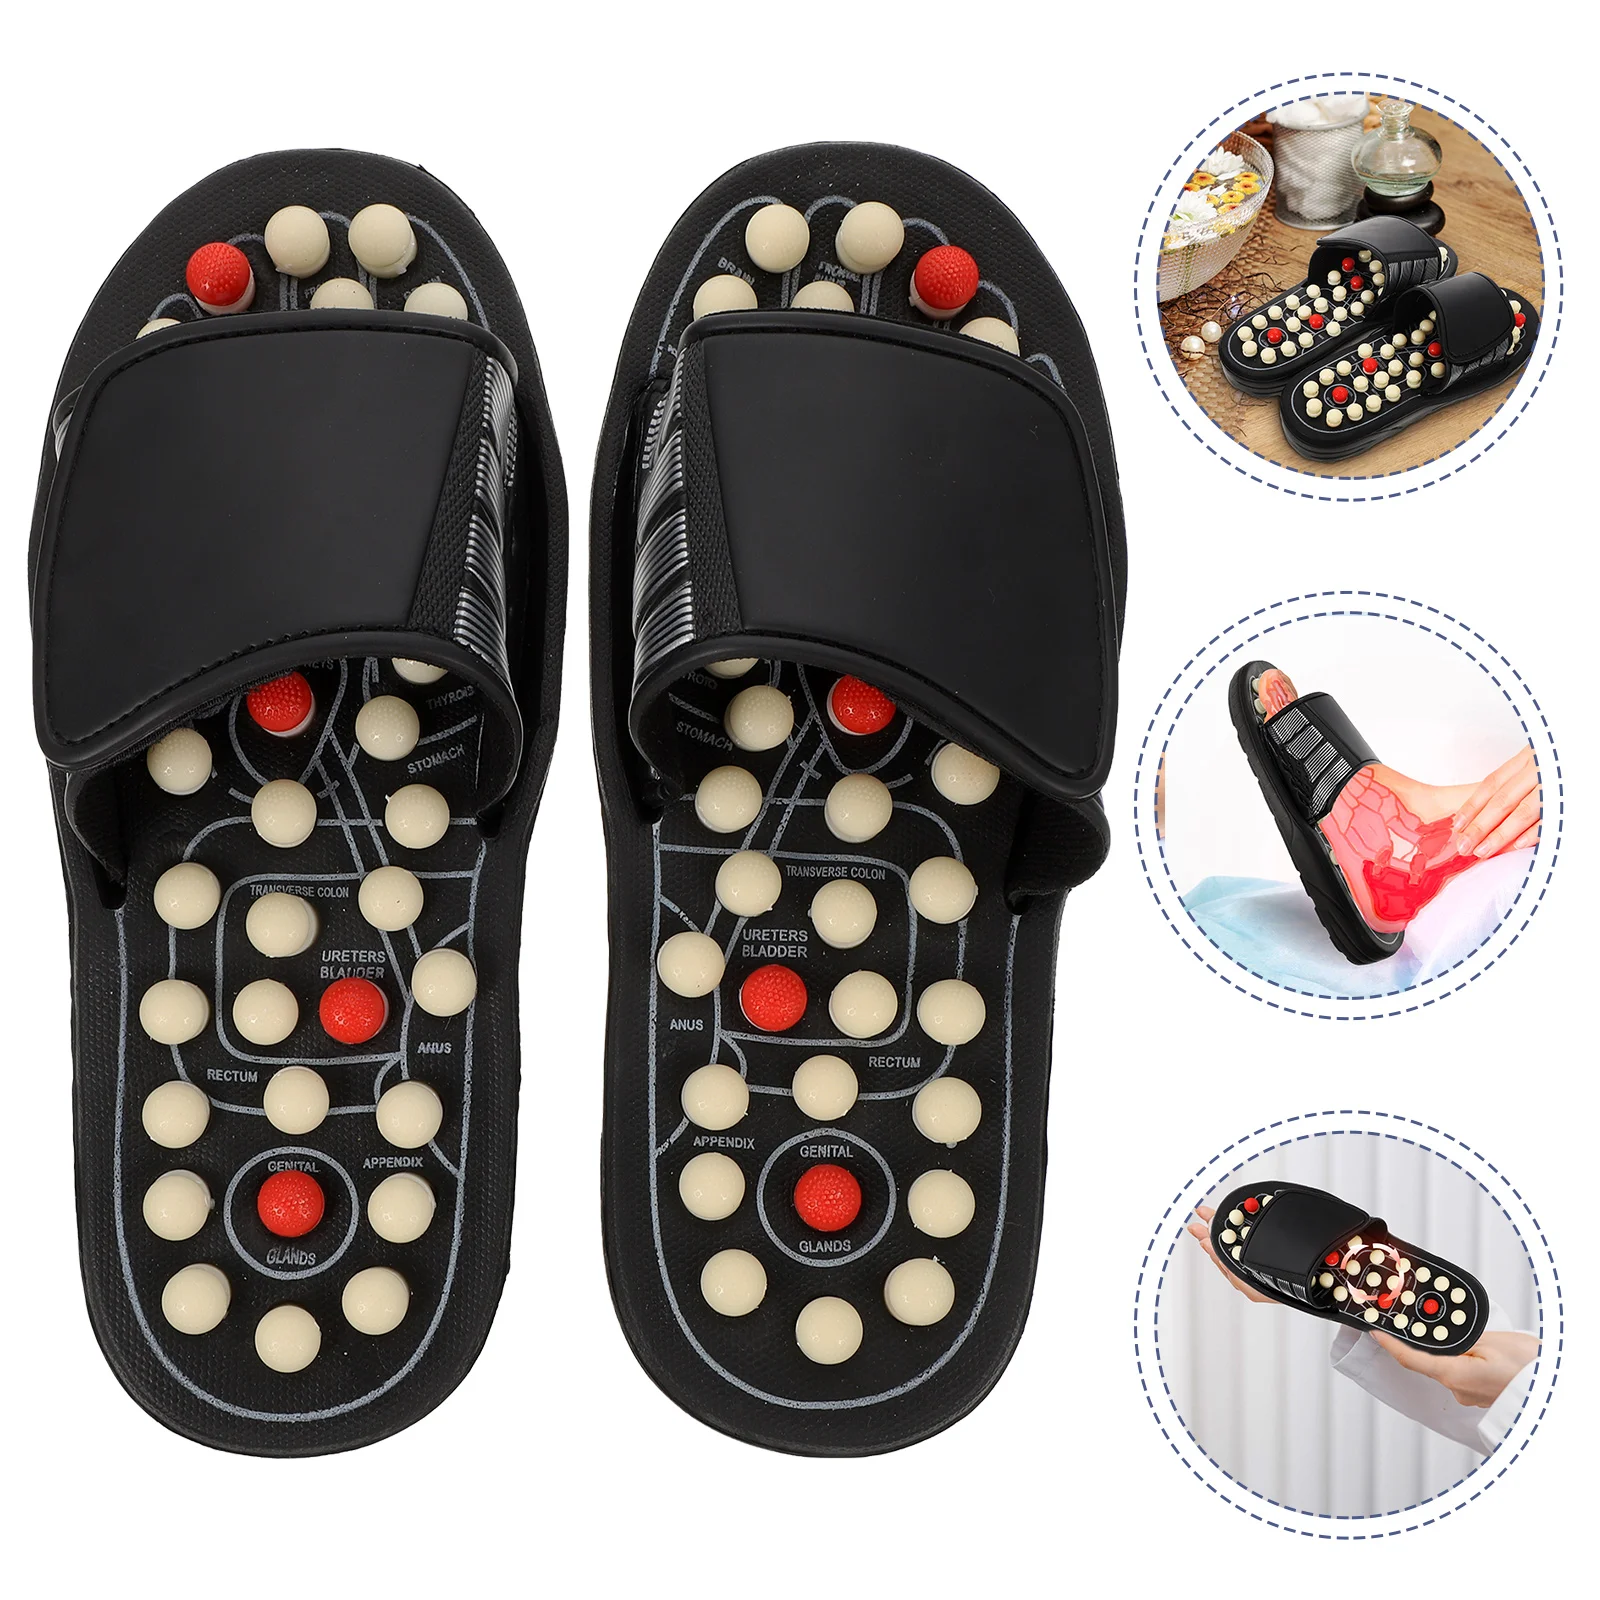 

1 Pair Acupressure Acupoint Slippers Acupoint Stimulation Slippers Shoes Reflexology Sandals Relaxation Gift Care Supplies for